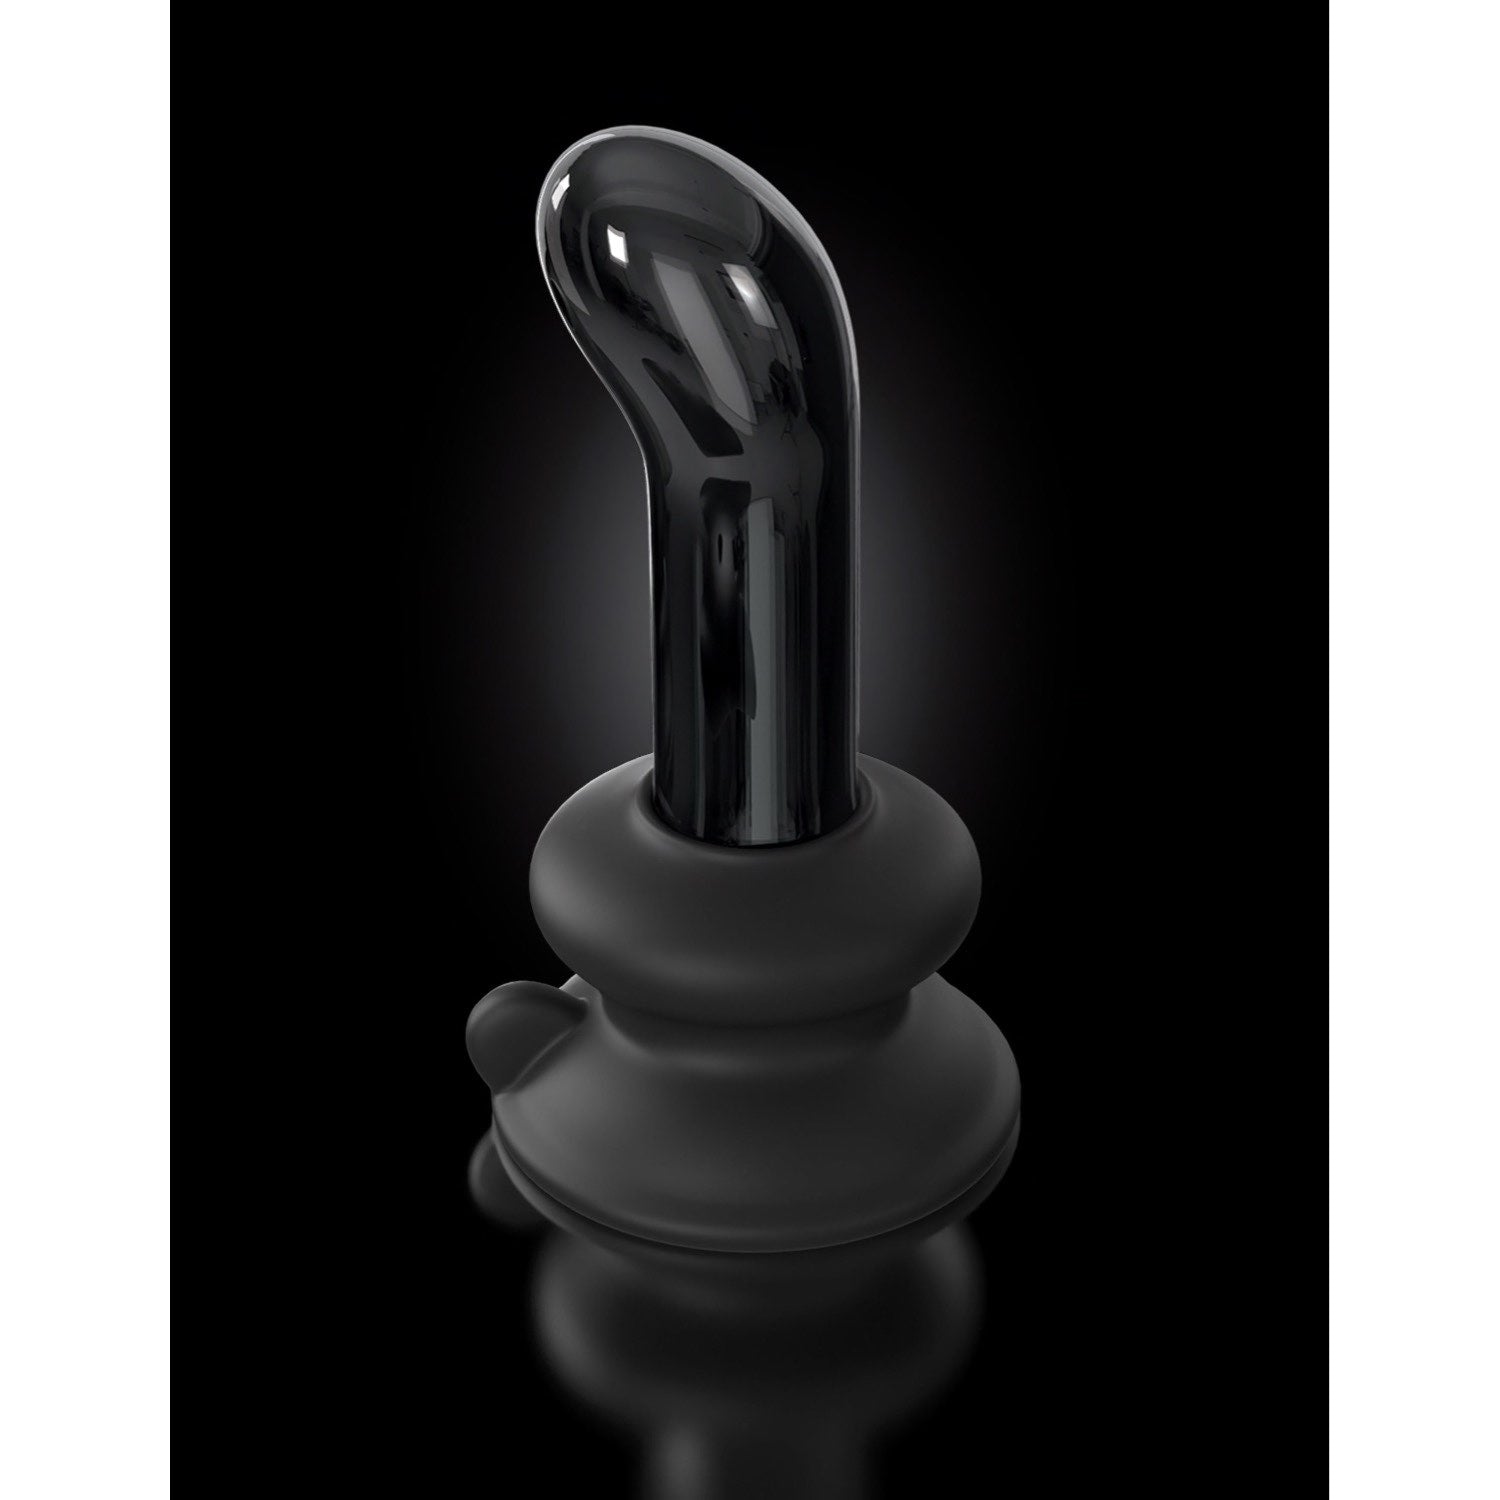 Icicles No. 84 - Black Glass USB Rechargeable Vibrating Butt Plug with Remote by Pipedream